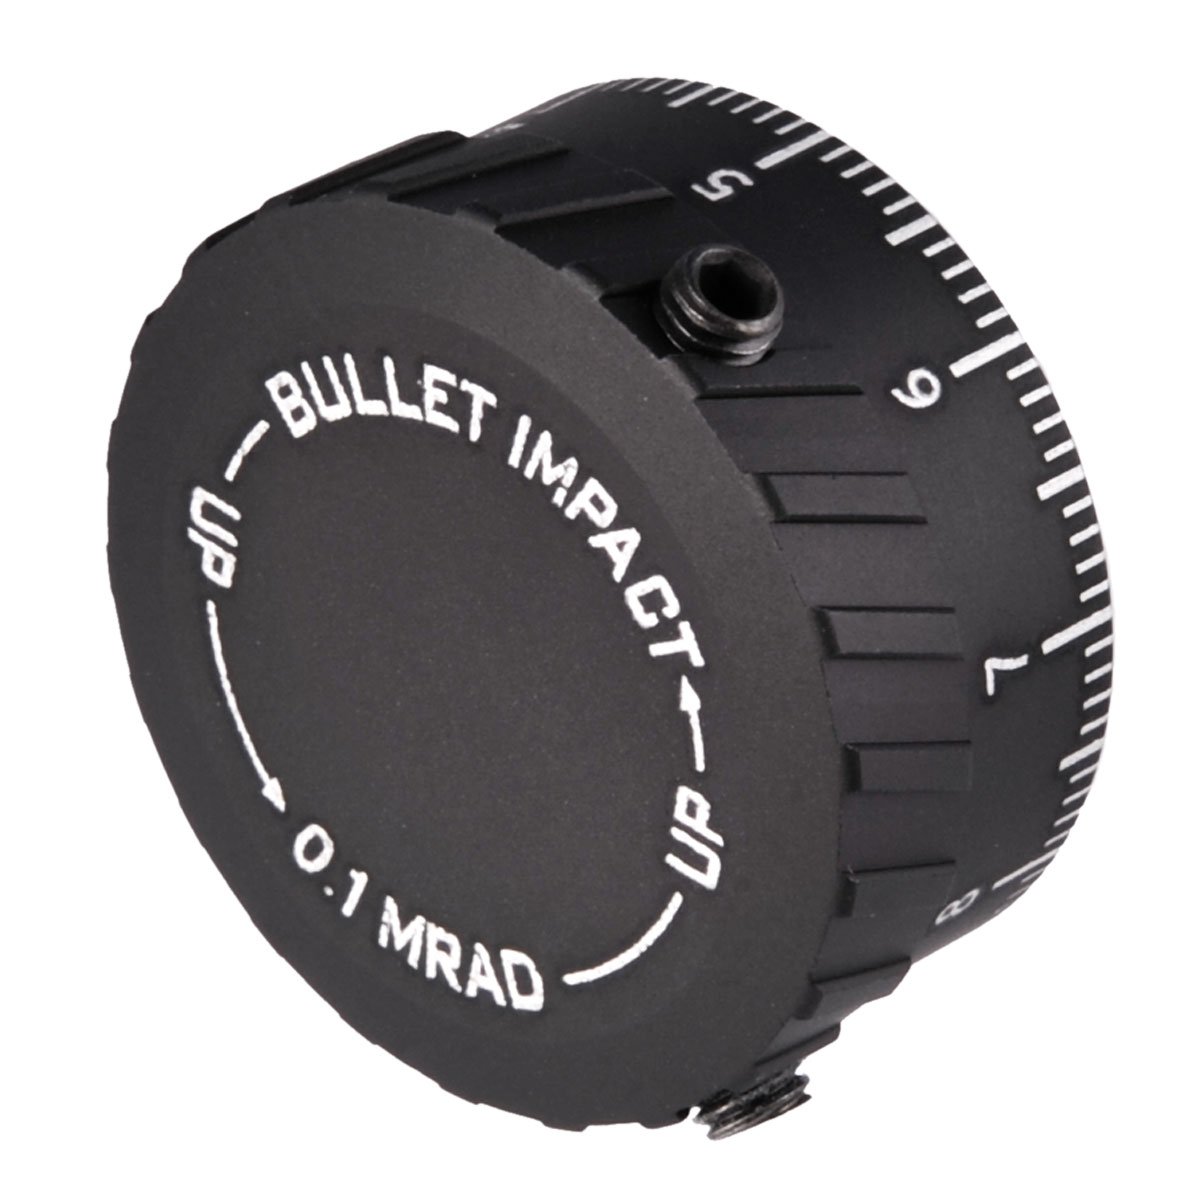 BROWNELLS - MATCH PRECISION OPTIC (MPO) EXTENDED RANGE ELEVATION TURRET